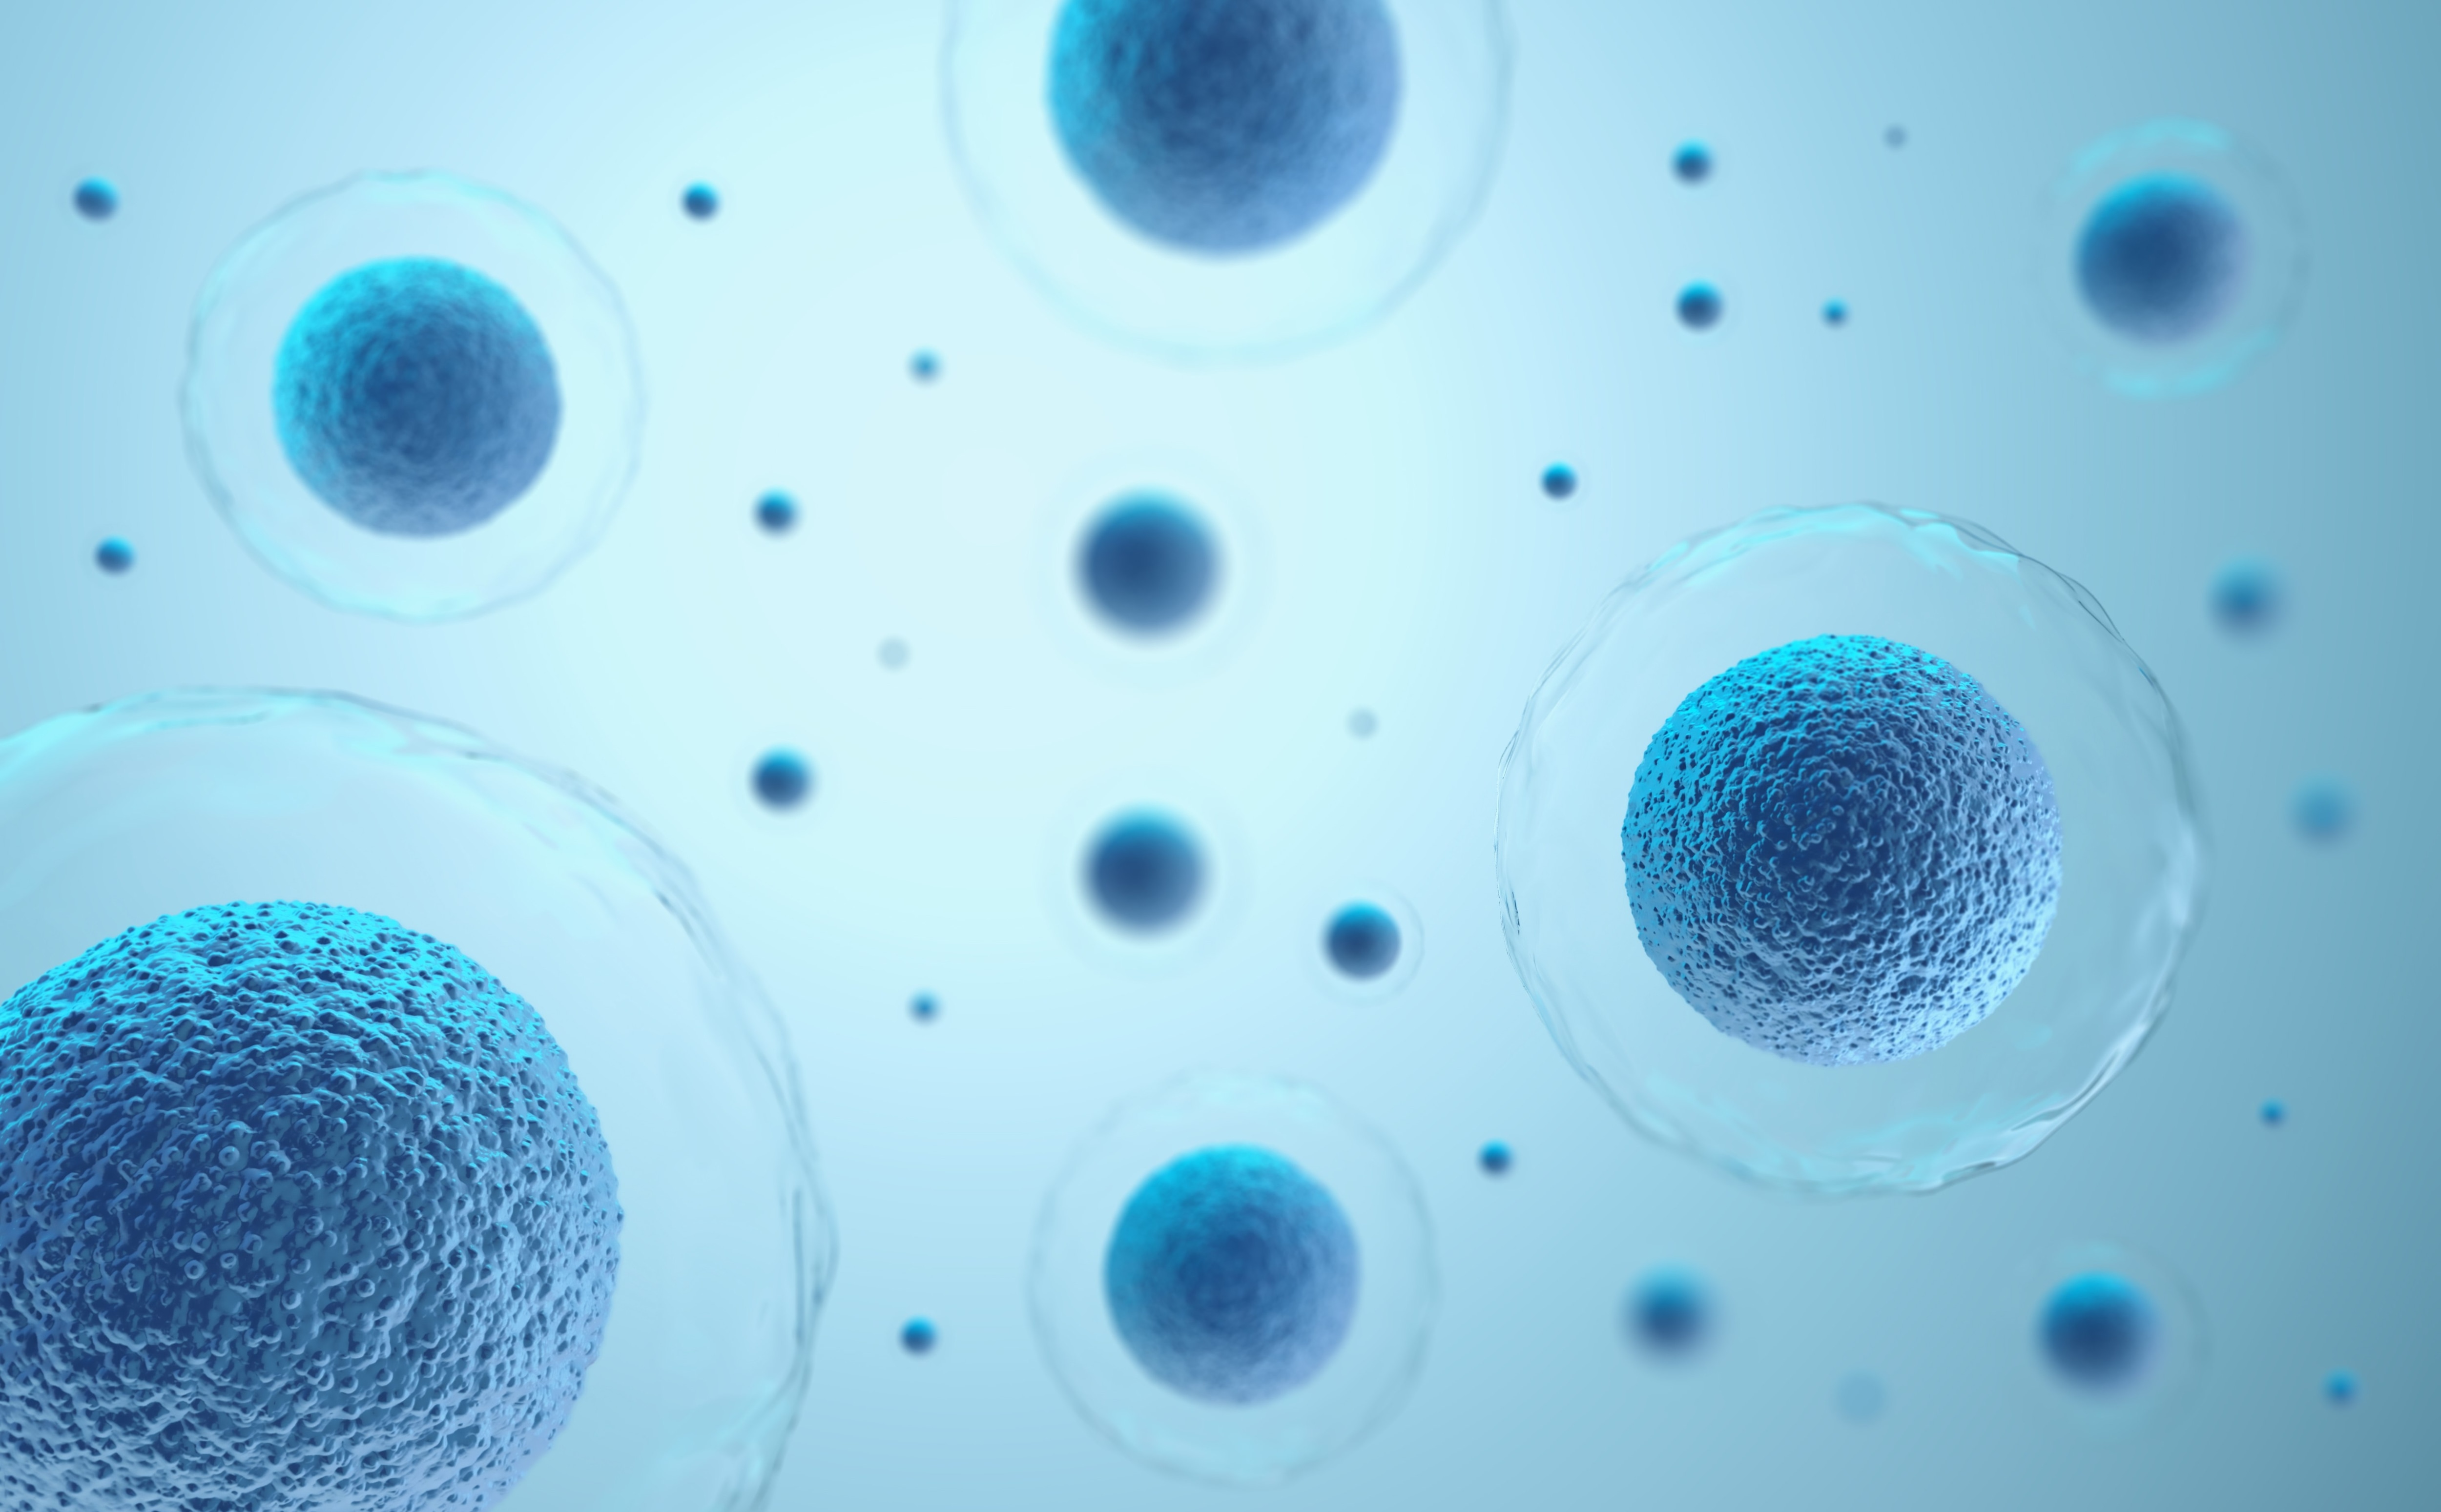 A digital illustration of multiple blue colored cells, representing human cells, suspended in a light blue environment.